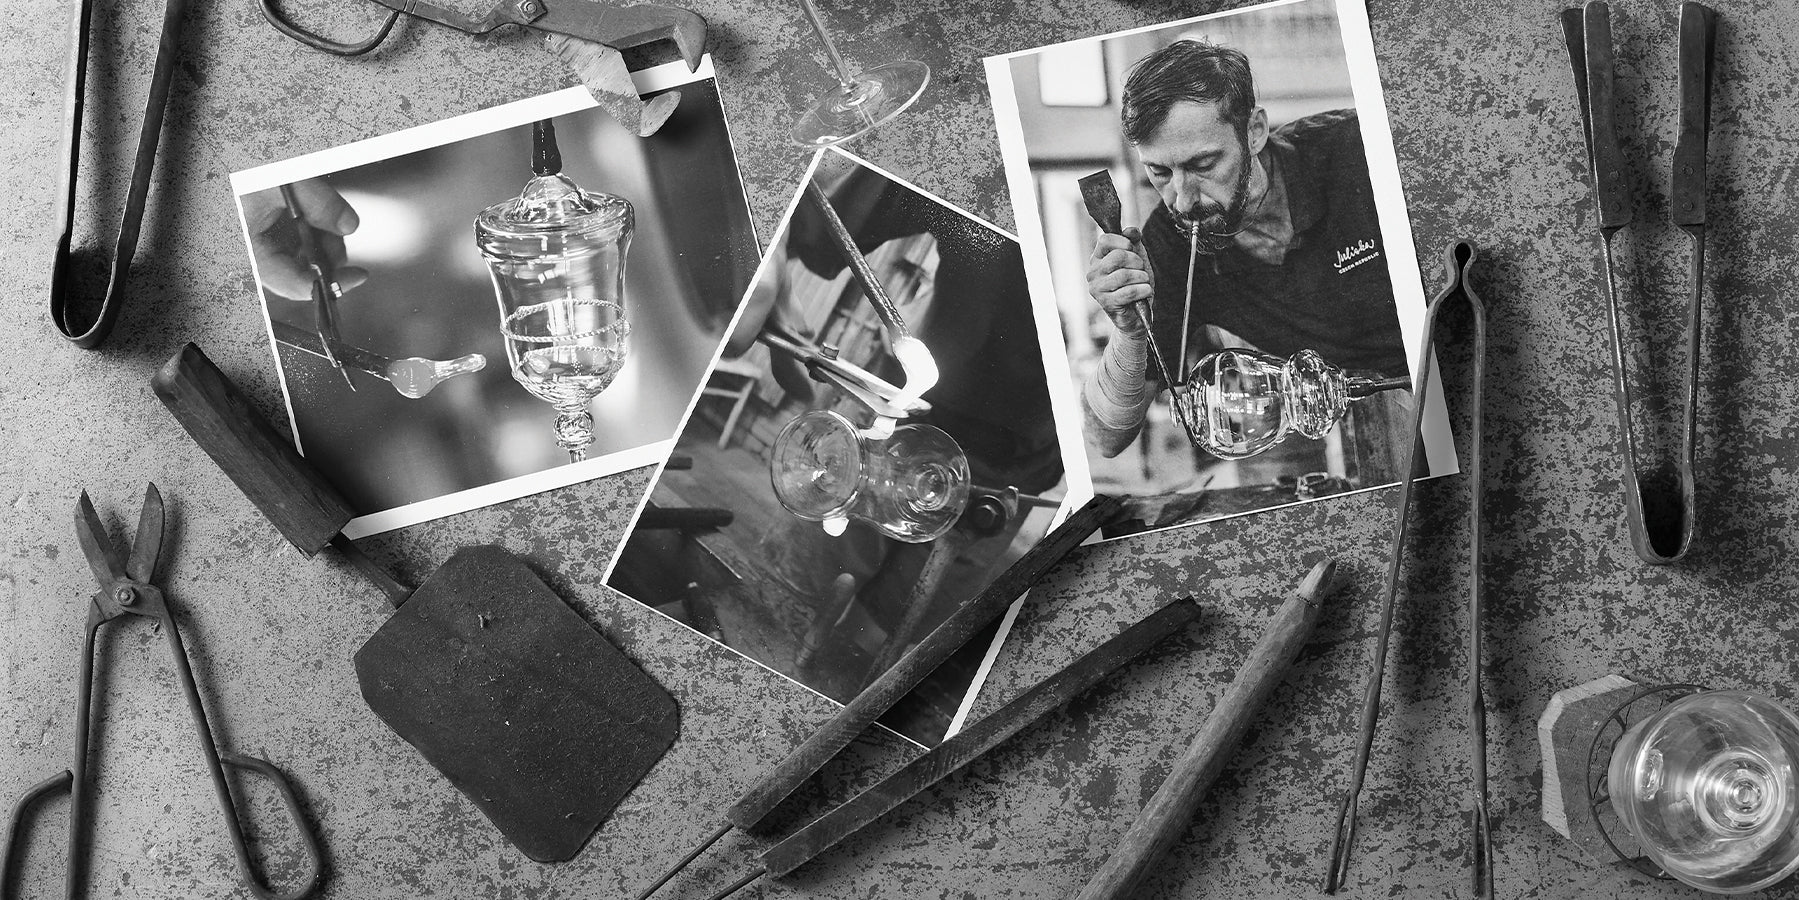 Overhead shot of collage of old glass blowing tools and black and white photos of glass makers.